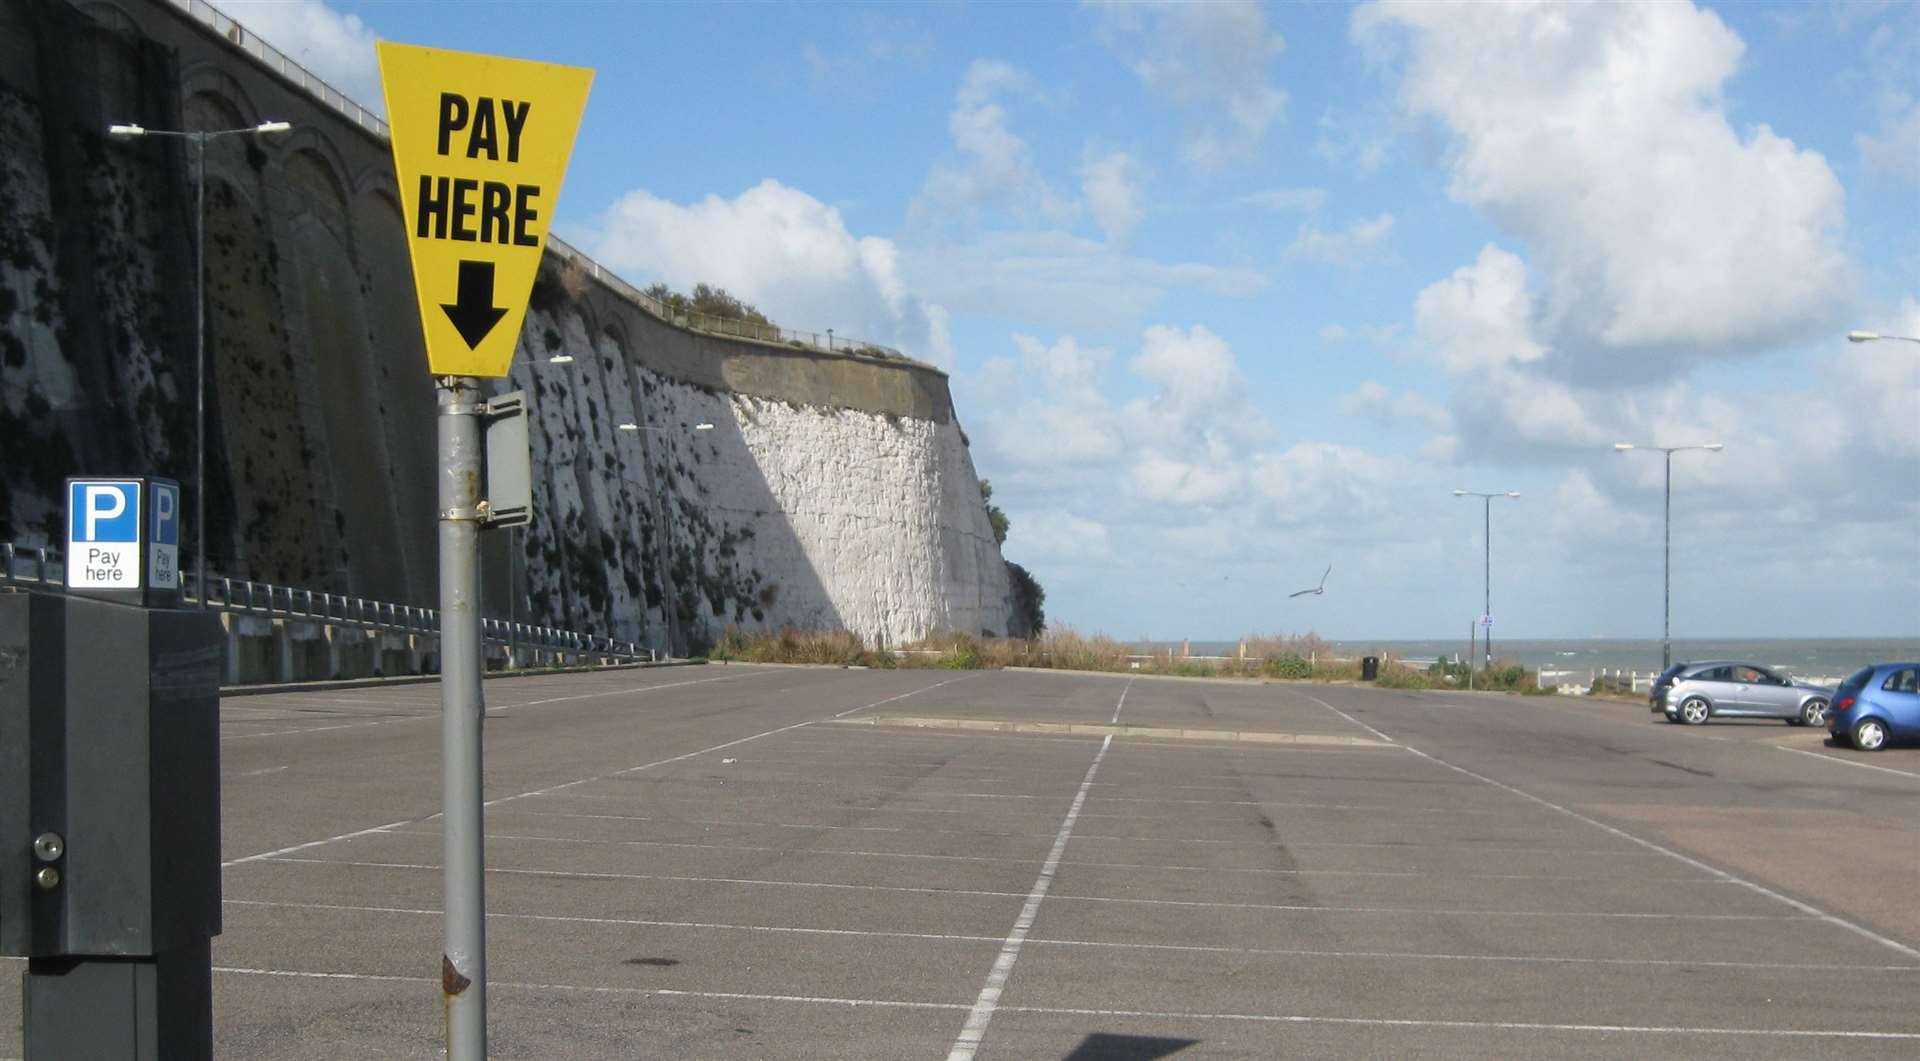 Car parks in Thanet have permit discs